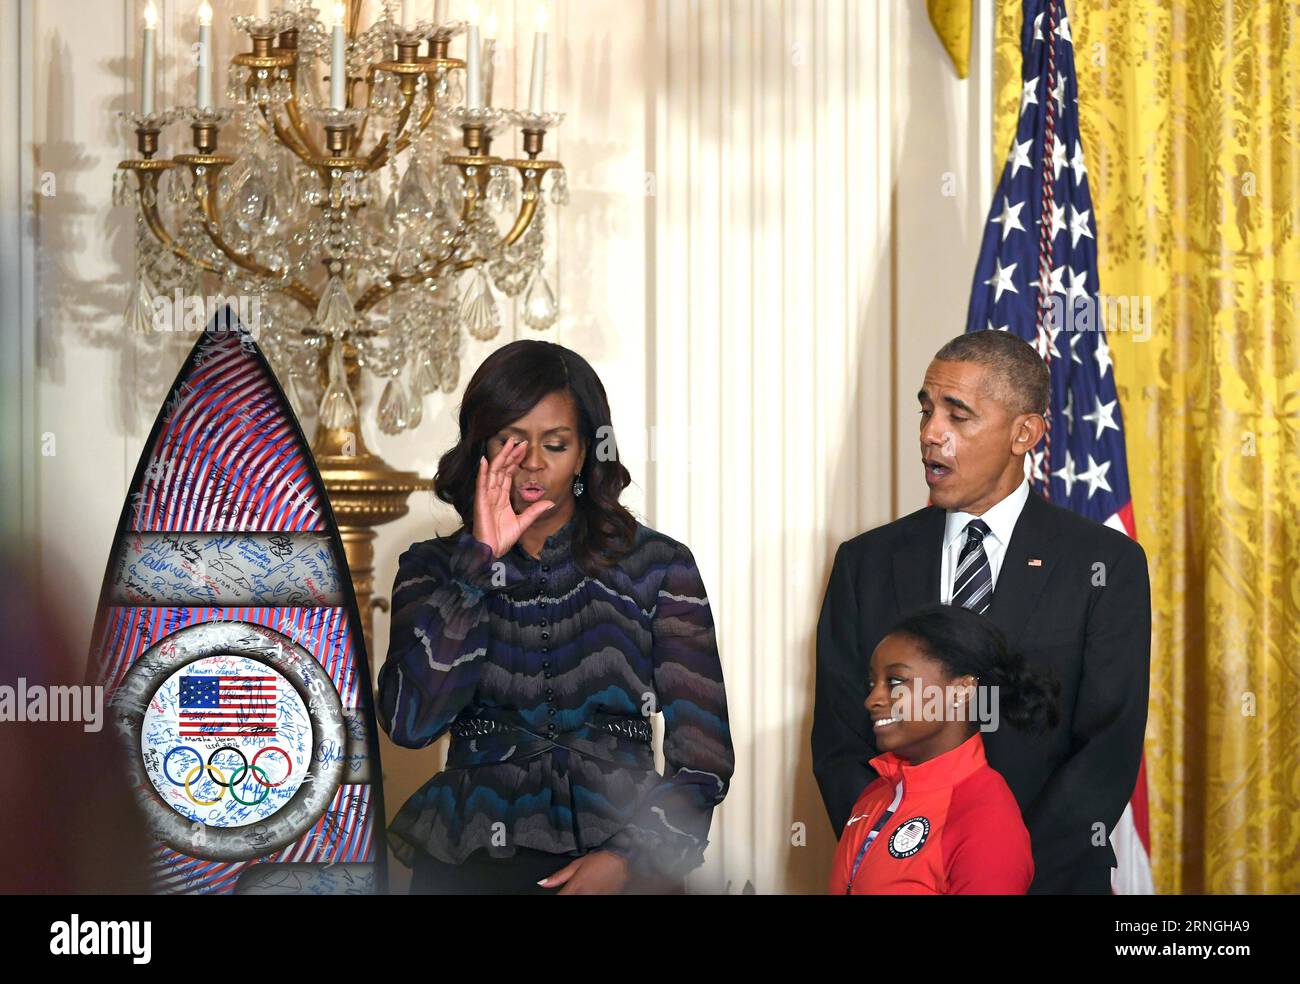 WASHINGTON D.C., Sept. 29, 2016 -- U.S. President Barack Obama (R), First Lady Michelle Obama (L) and Olympic gymnast Simone Biles attend a ceremony honoring members of the 2016 U.S. Olympic and Paralympic Teams in the East Room of White House in Washington D.C., the United States, Sept. 29, 2016. ) (SP)U.S.-WASHINGTON D.C.-OLY2016-OBAMA YinxBogu PUBLICATIONxNOTxINxCHN   Washington D C Sept 29 2016 U S President Barack Obama r First Lady Michelle Obama l and Olympic Gymnast Simone Biles attend a Ceremony honoring Members of The 2016 U S Olympic and Paralympics Teams in The East Room of White H Stock Photo